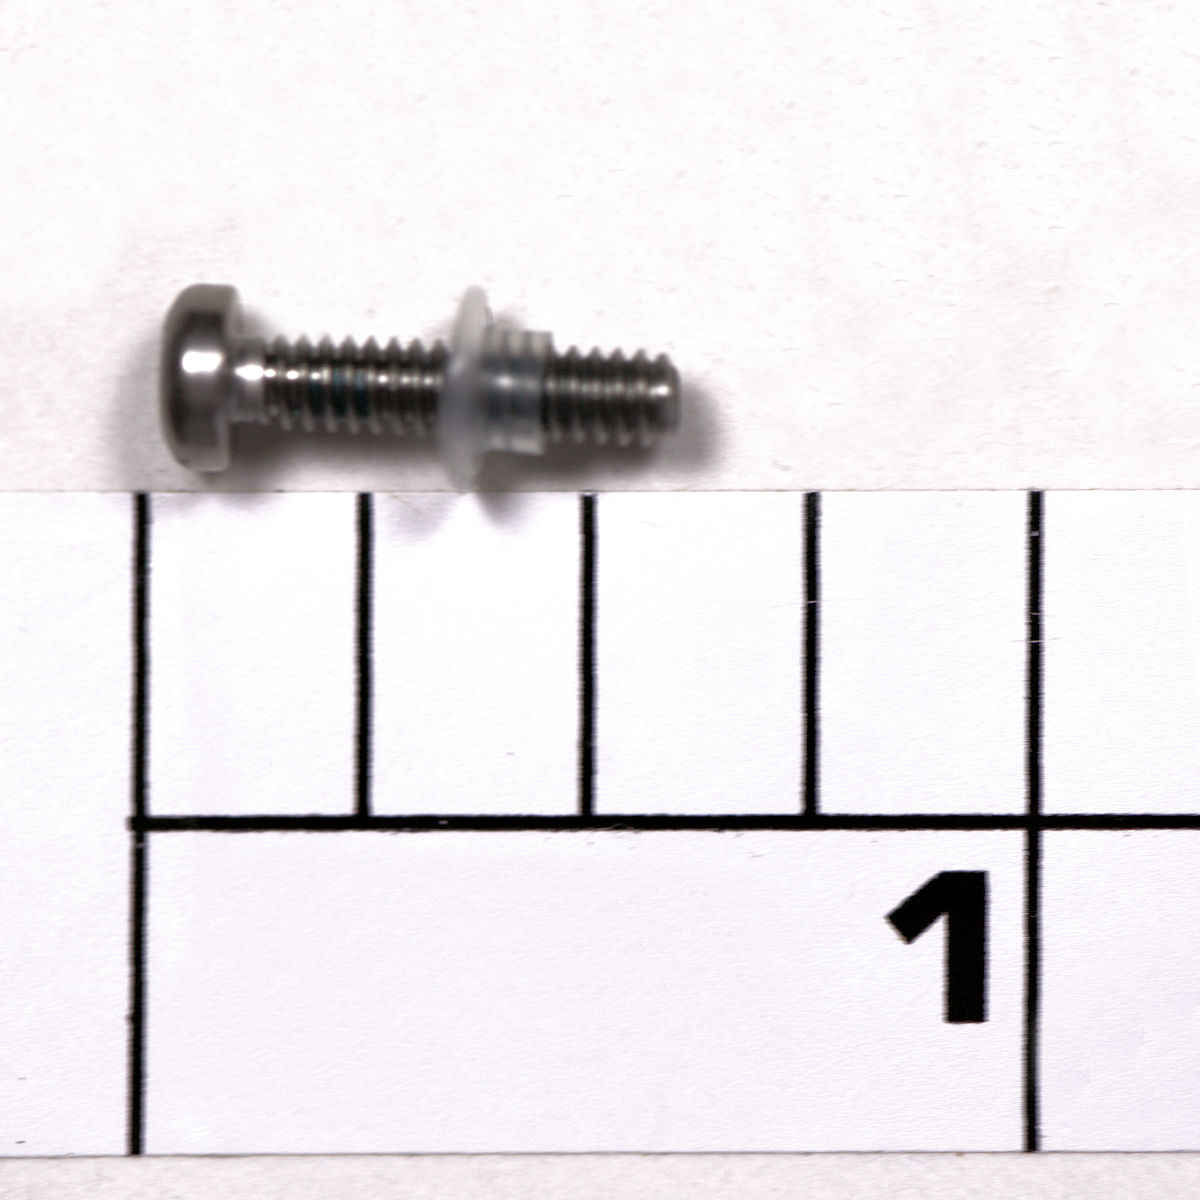 39-12VSXN Screw with Collar (uses 8)